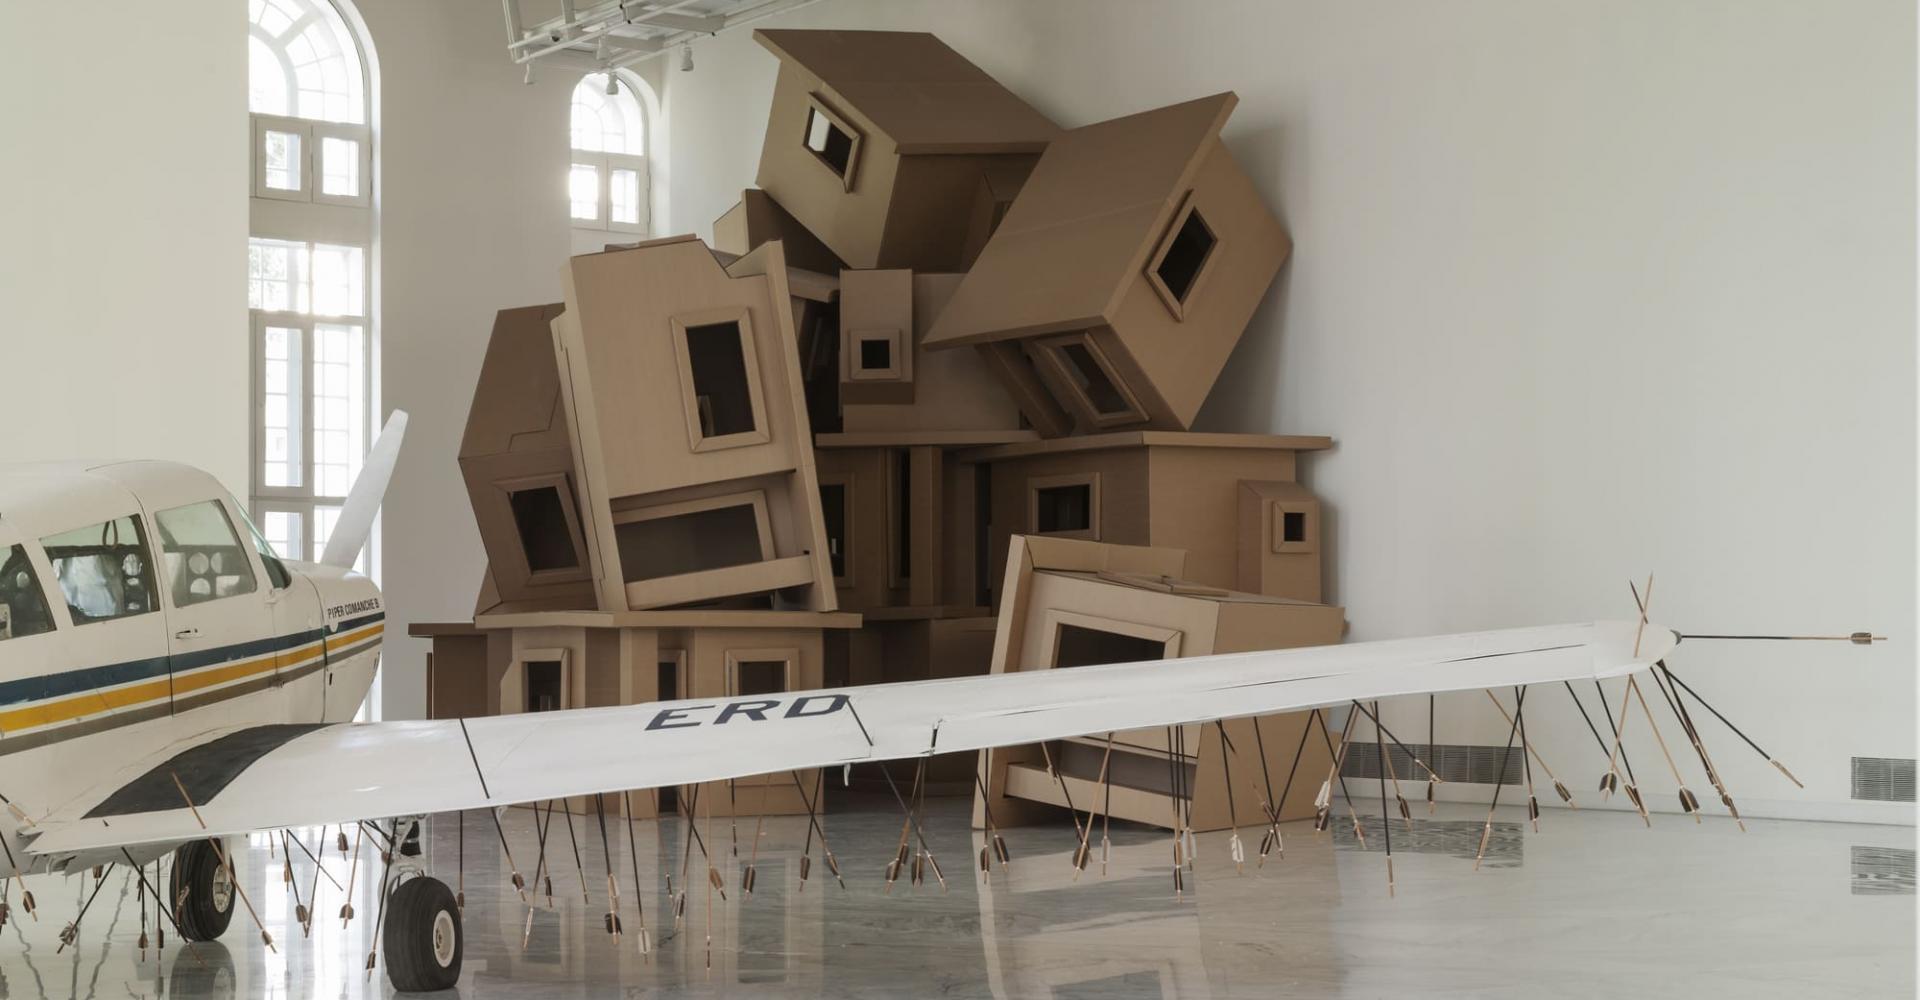 Cardboard houses stacked with a plane whose underbelly is covered in arrows in the foreground.